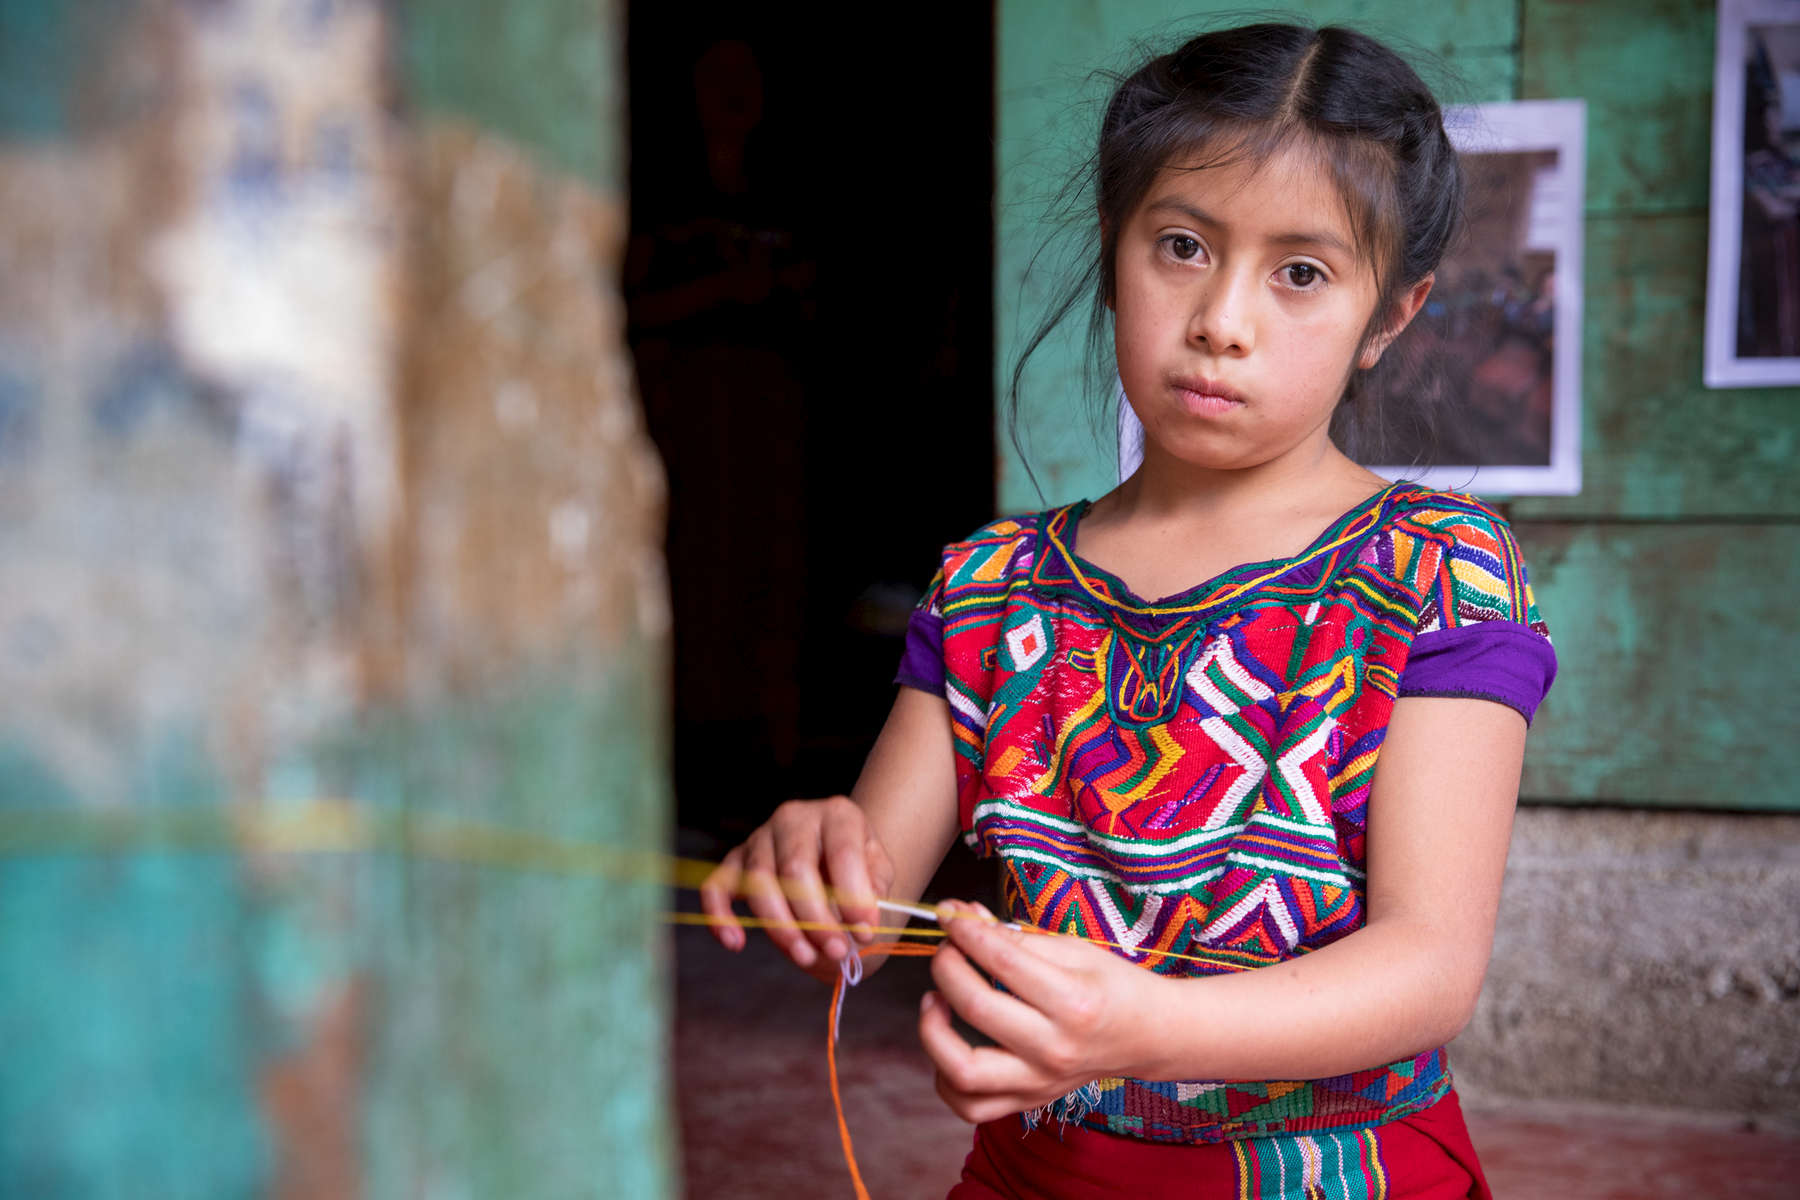 Heidy, 9, weaves on front of her family's home in a small community in Guatemala’s Western Highlands. It is an agricultural region characterized by underdevelopment, malnutrition, poverty and a lack of opportunity. Her grandmother, Maria de León Santiago, recently started saving for the first time ever through the “Communities Leading Development” program, which is implemented by local partners with technical support from Mercy Corps. The program aims to improve quality of life for families in 200 communities in the Western Highlands, in part by installing community savings and loans groups to build financial stability. Maria is the president of her savings and loan group, and she says she is focused solely on saving right now, so she can give her family a better life than she had growing up. 